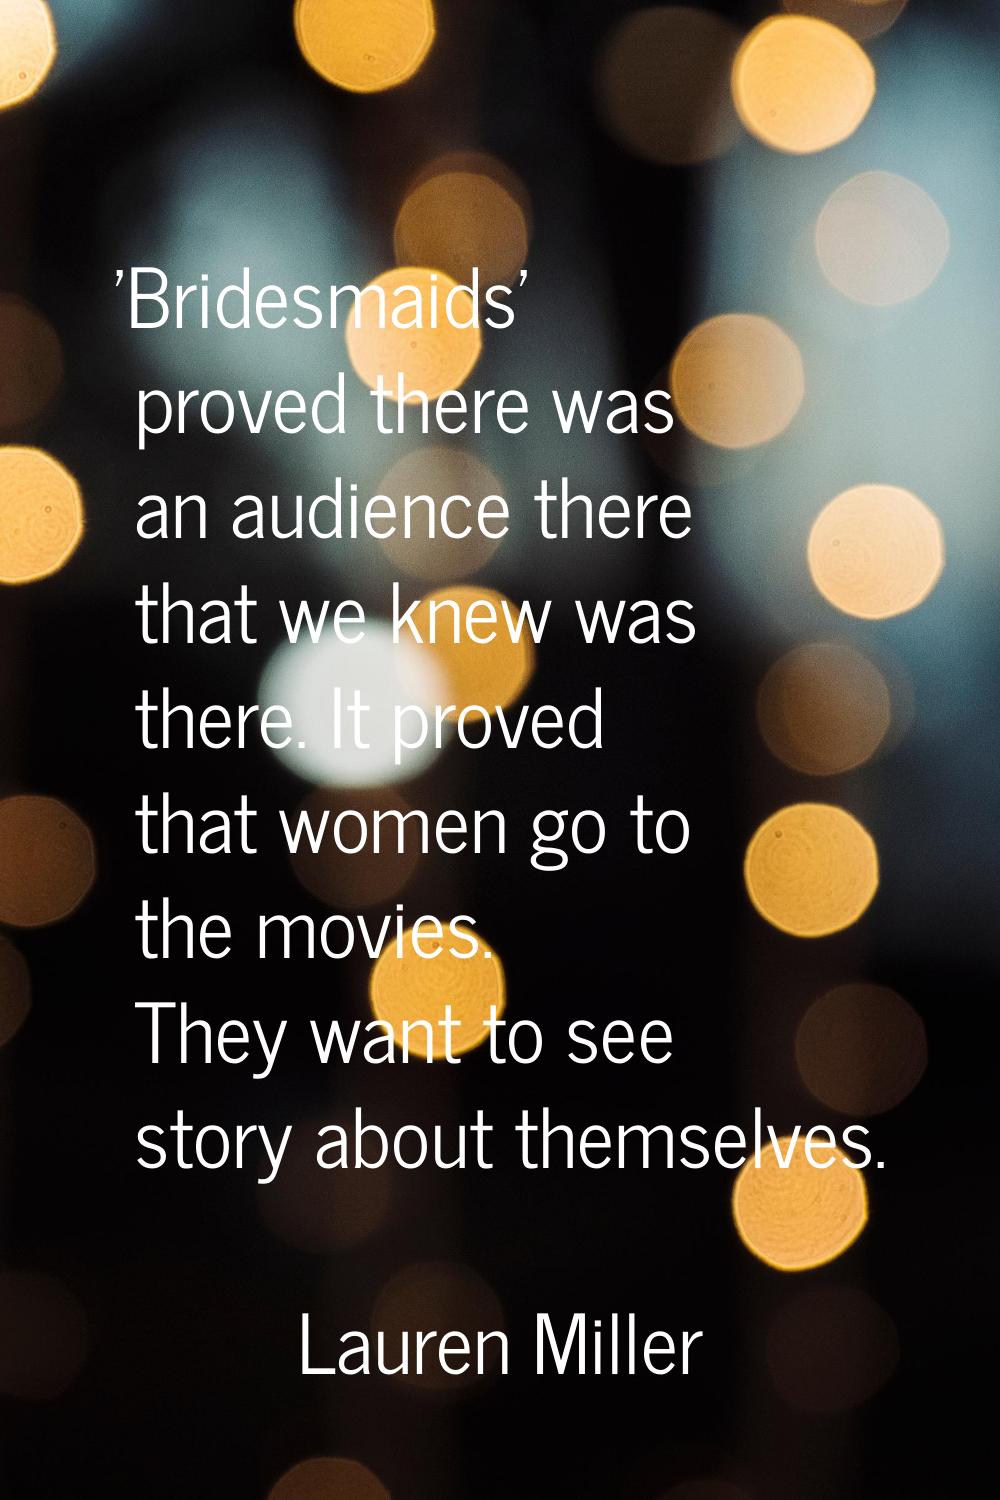 'Bridesmaids' proved there was an audience there that we knew was there. It proved that women go to